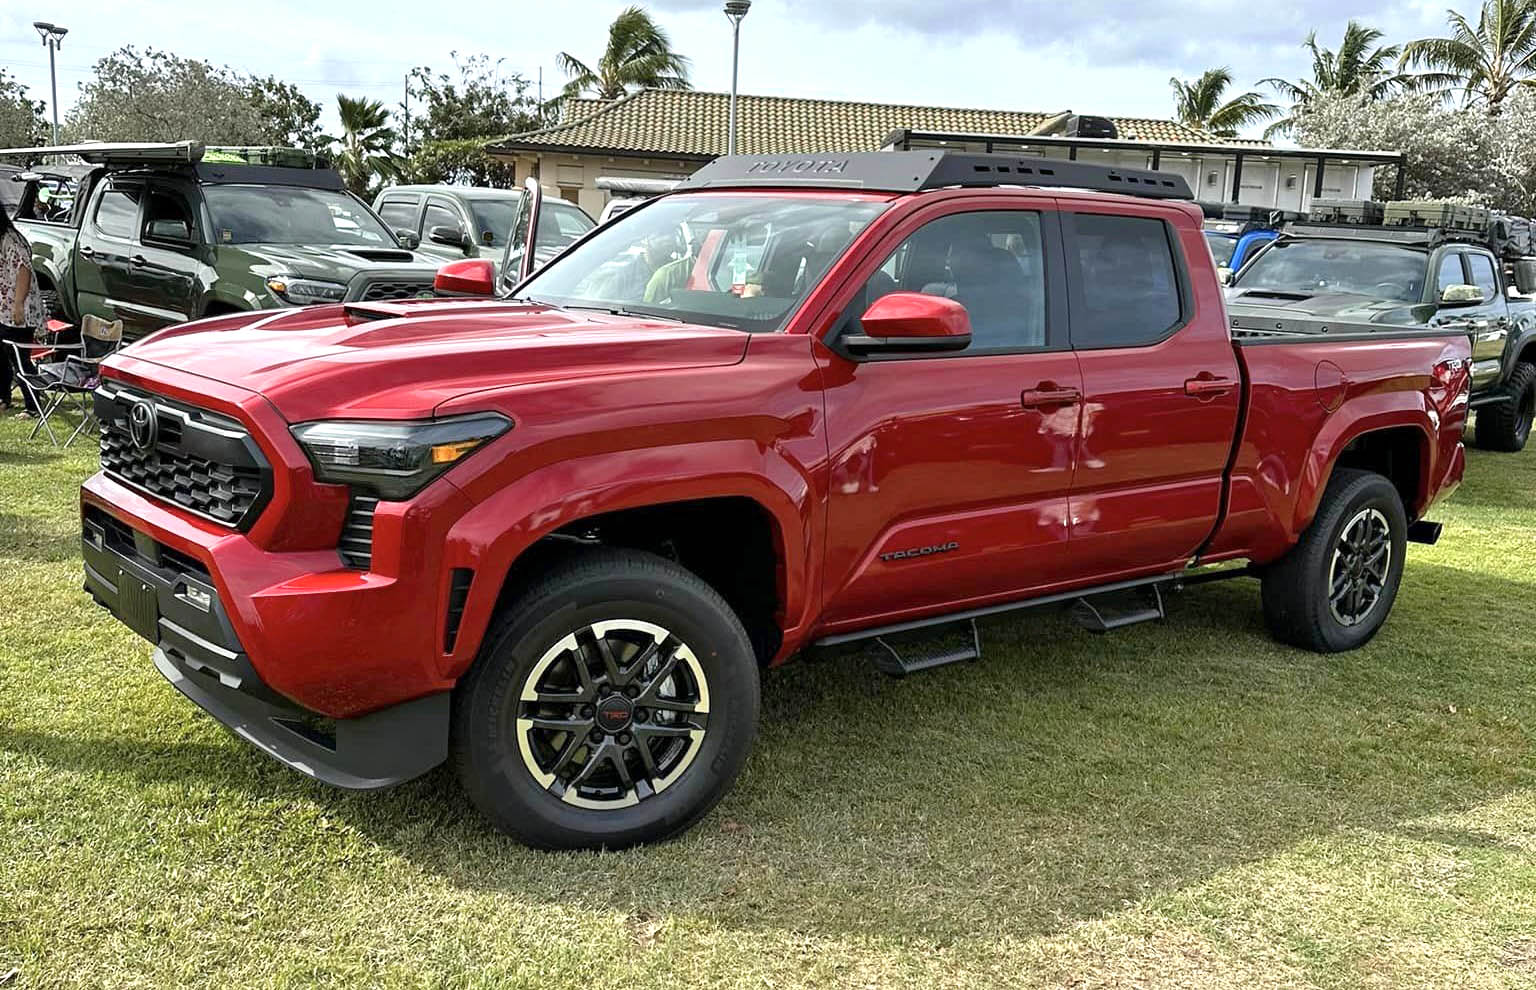 2024 Tacoma Roof Rack Package + Locking Center Console Vault installed on 2024 Tacoma TRD Sport Roof Rack Package 2024 Tacoma TRD Sport 1 copy